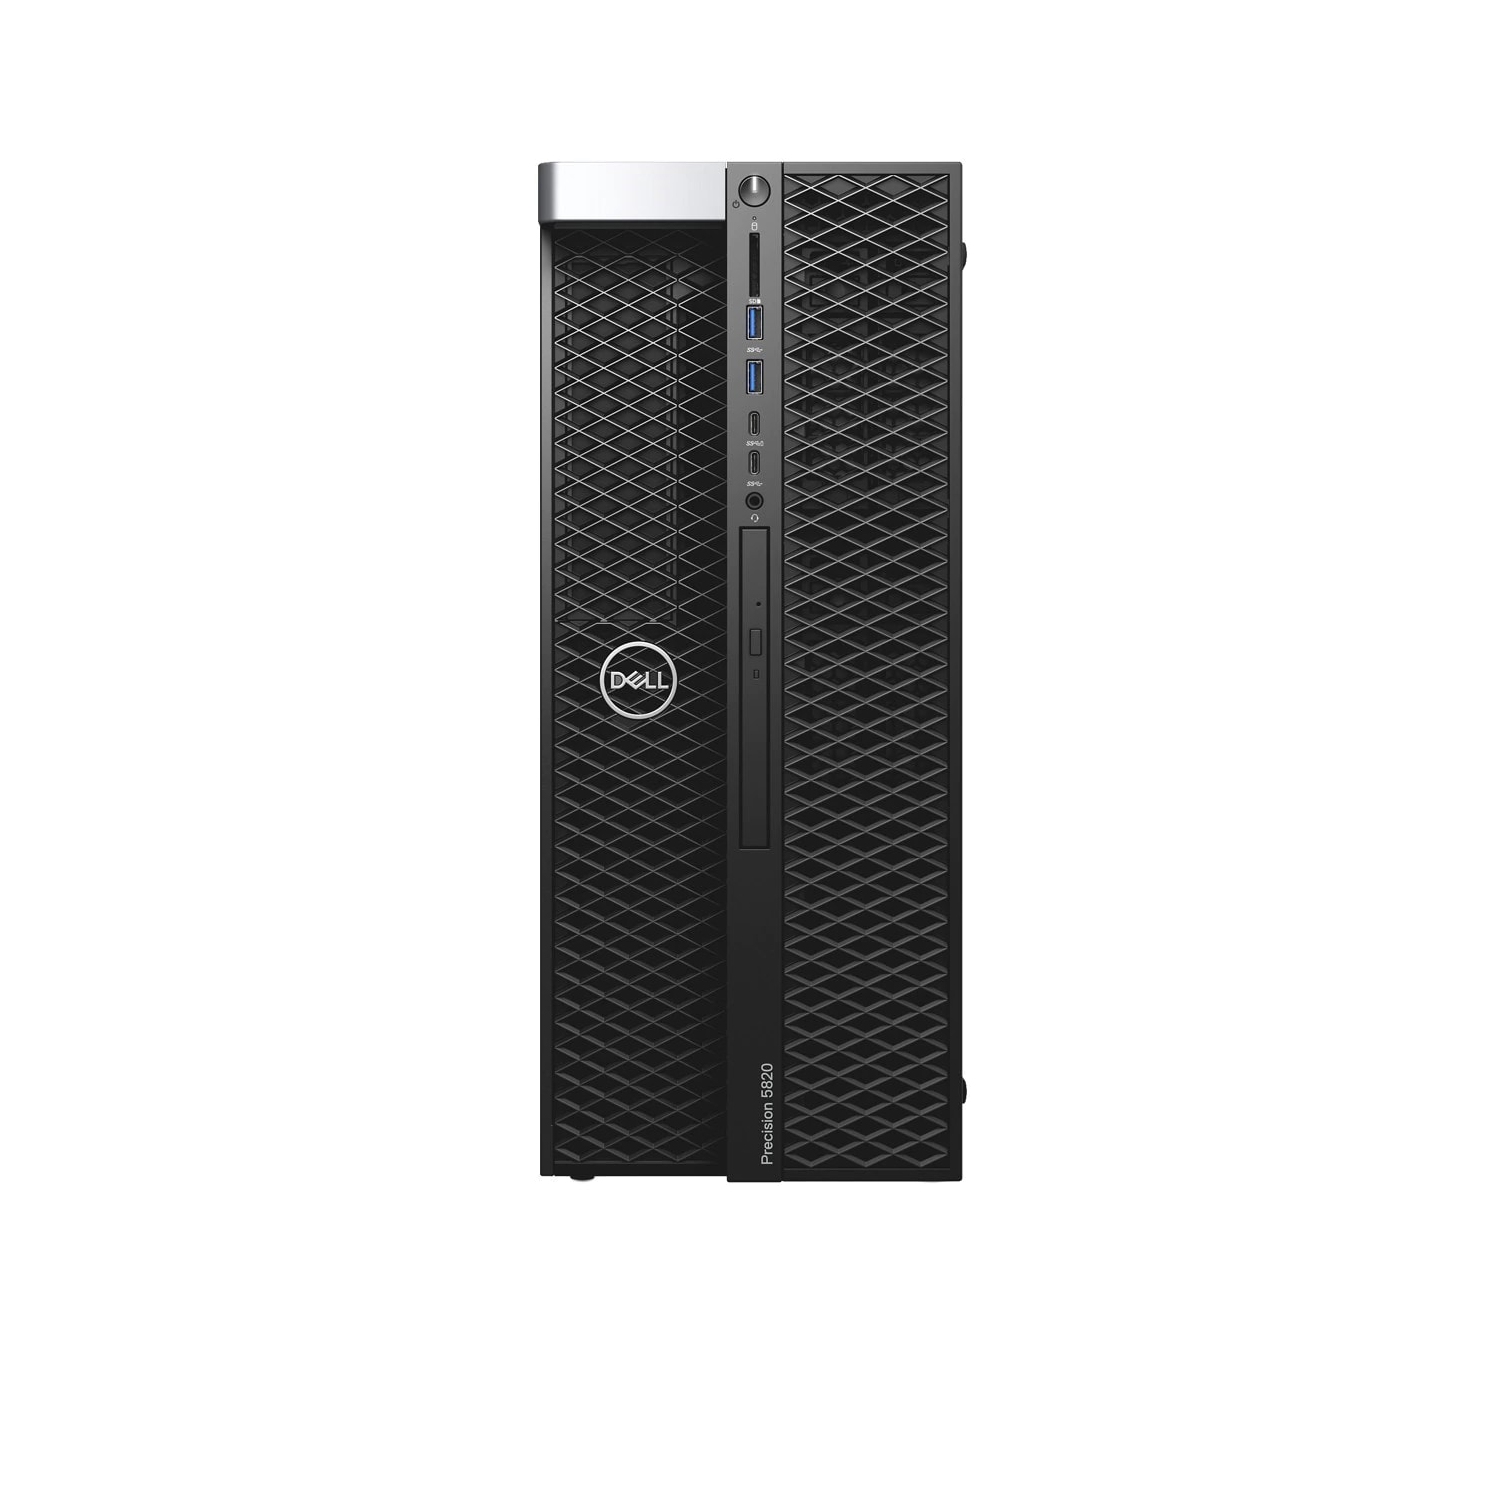 Refurbished (Excellent) - Dell Precision T5820 Workstation Desktop (2018), Core i9, 1TB HDD, 8GB RAM, Quadro P2200, 10 Cores @ 4.5 GHz, 10th Gen CPU Certified Refurbished